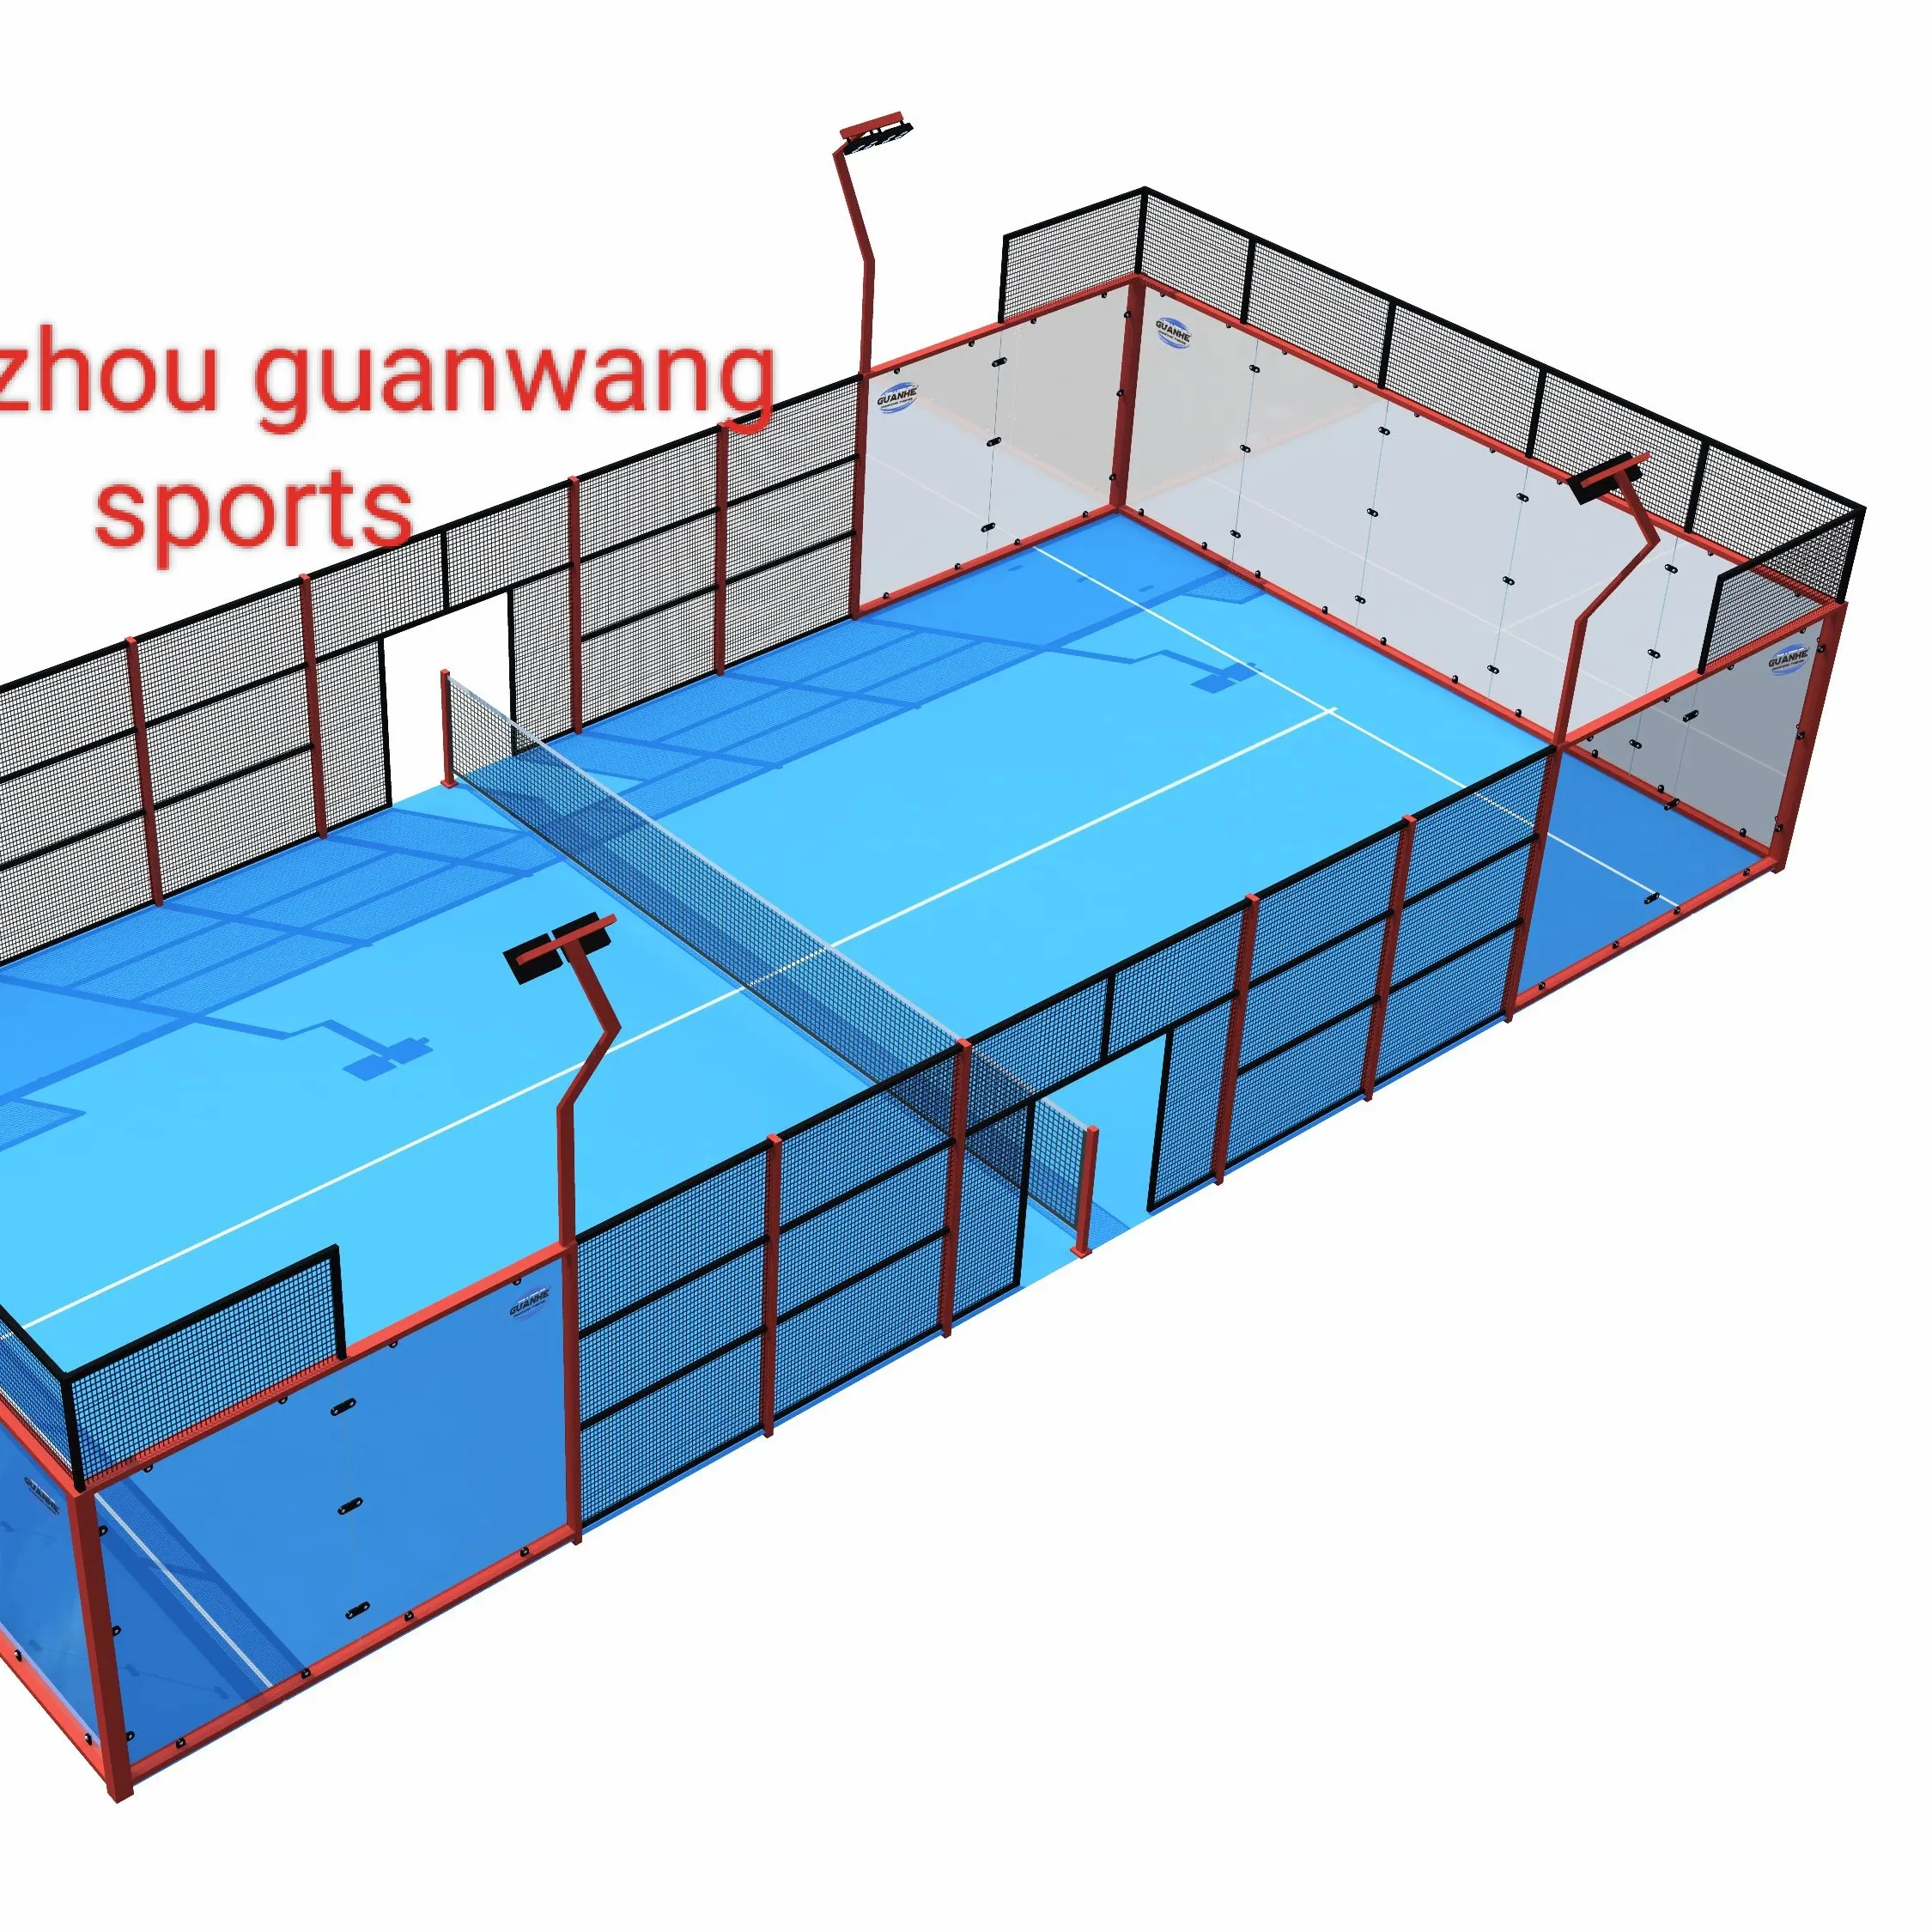 padel panoramic court padel tennis court for indoor or outdoor paddle